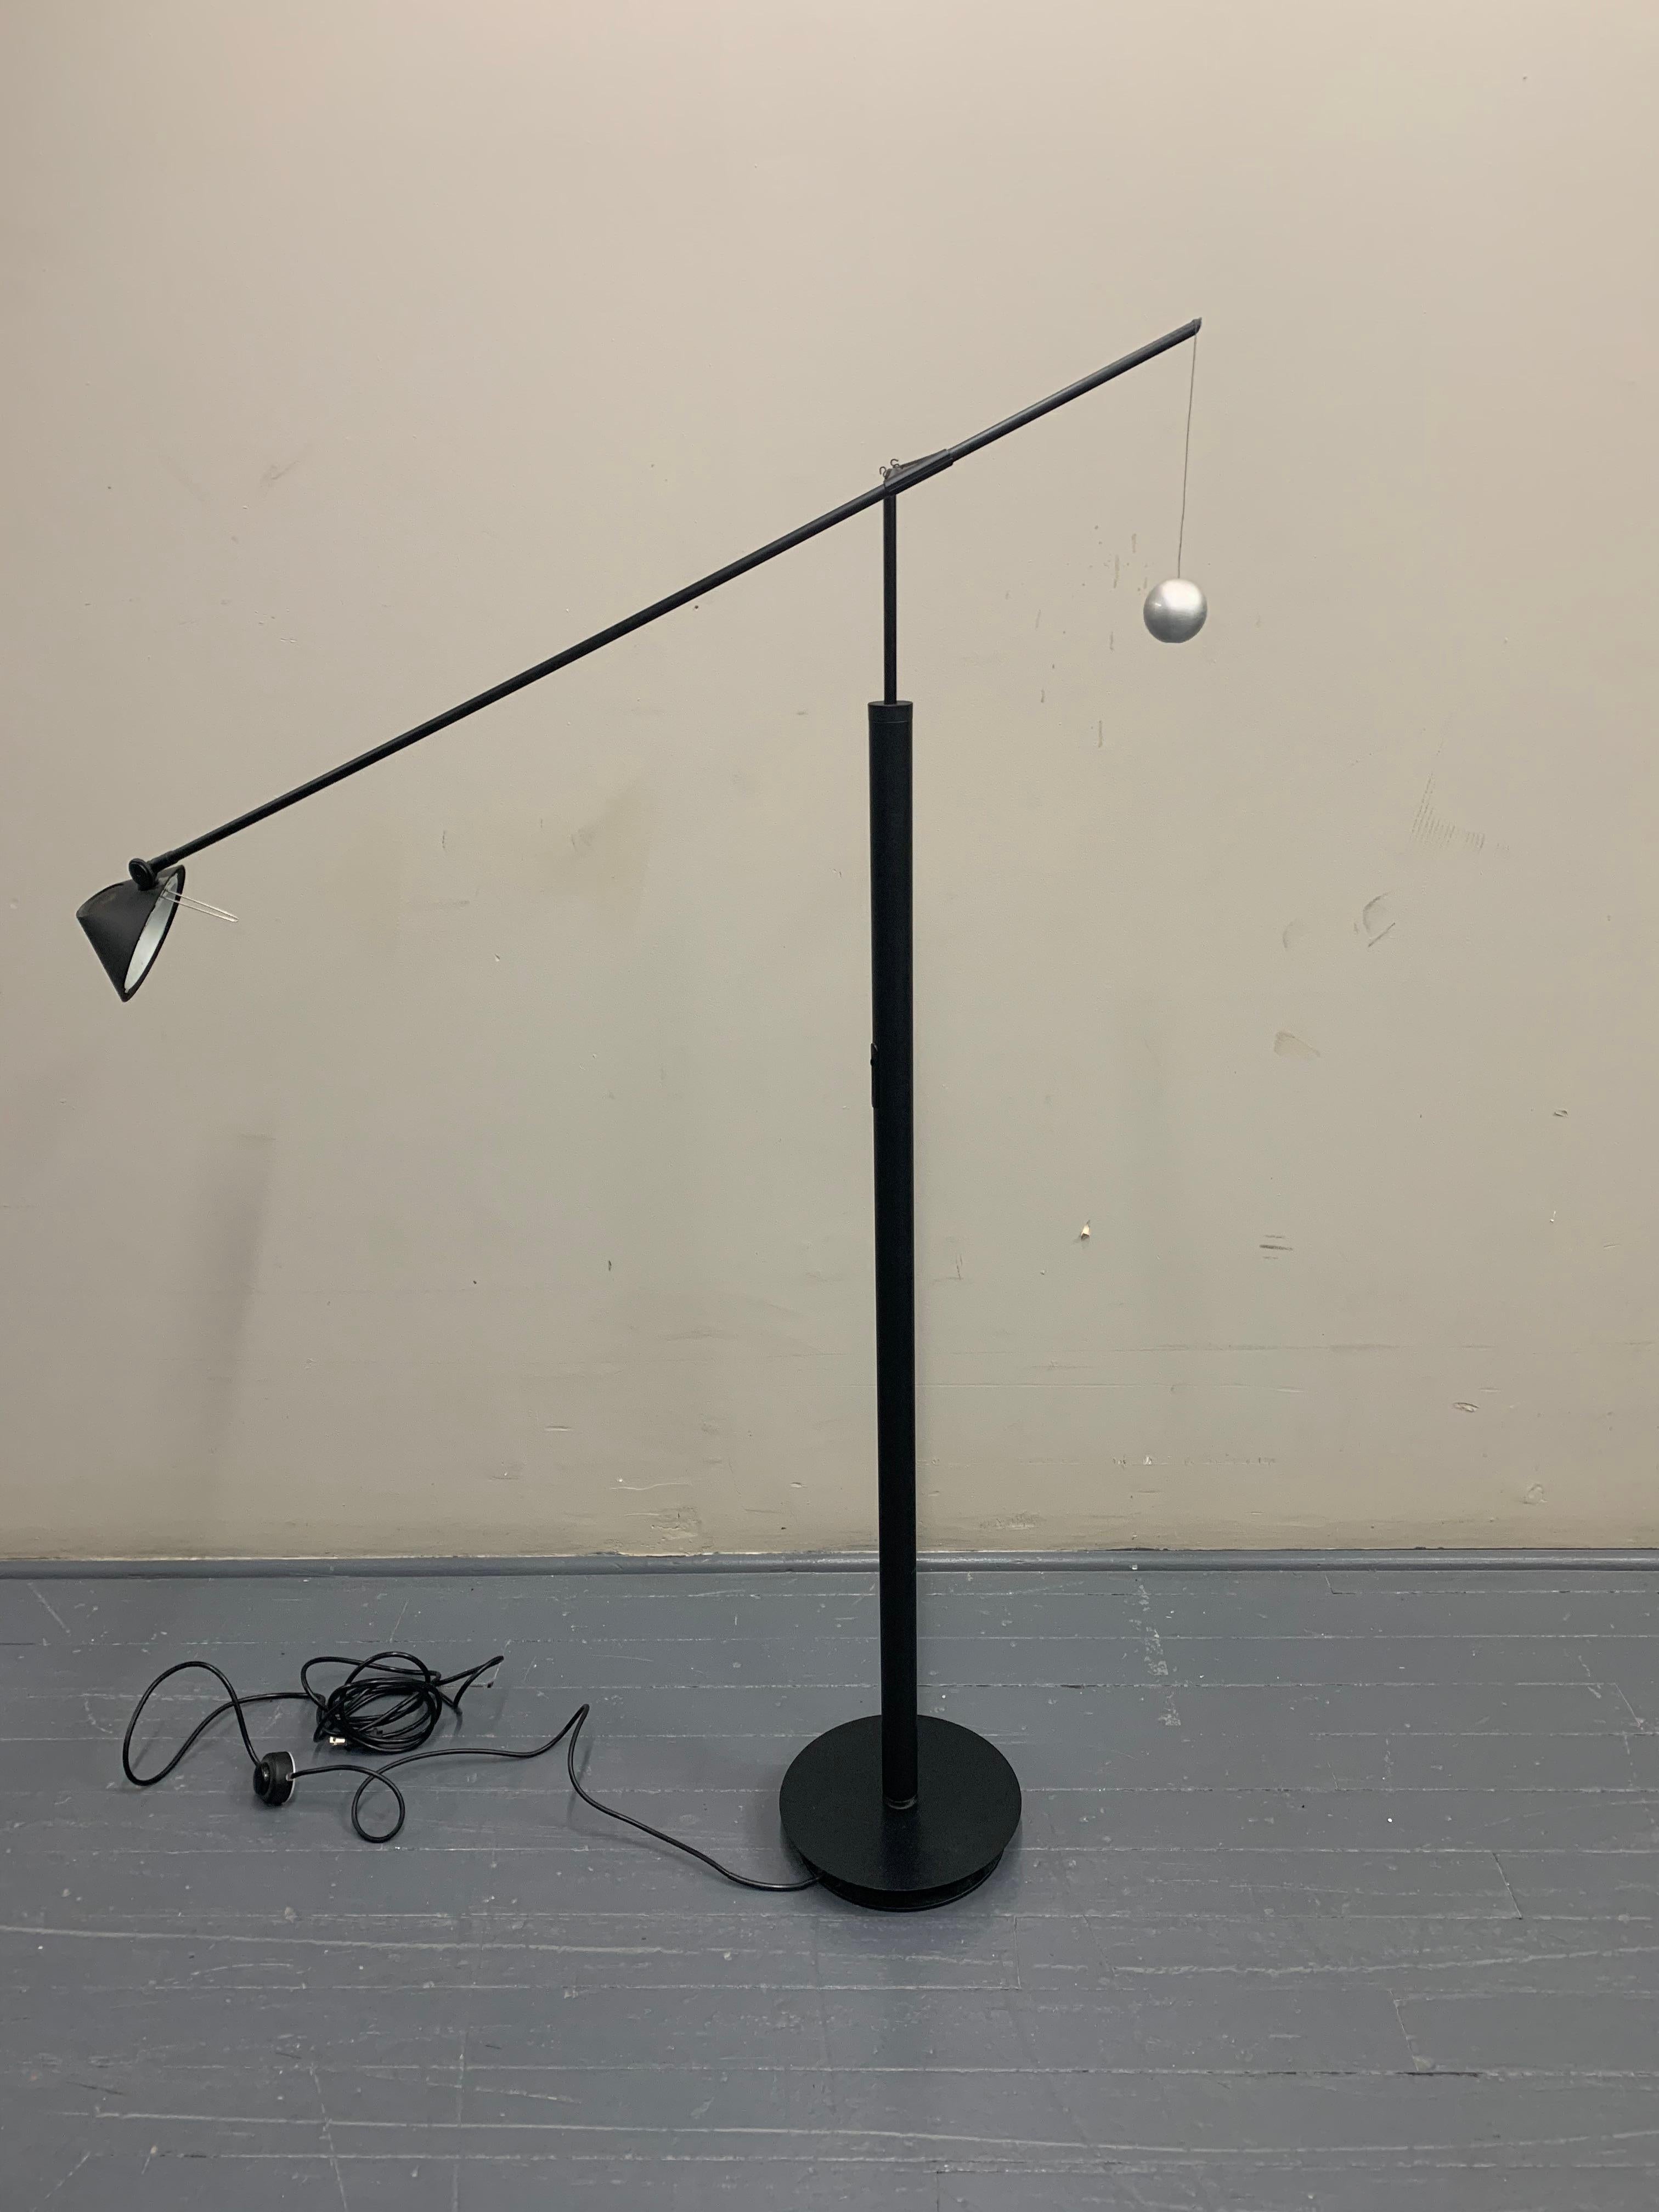 This floor reading lamp Nestore Lettura was designed by Carlo Forcolini 1989 and produced by Artemide, Italy. The table lamp was made of metal black lacquered and plastic. The metal ball acts as counterbalance and the arm is adjustable vertically